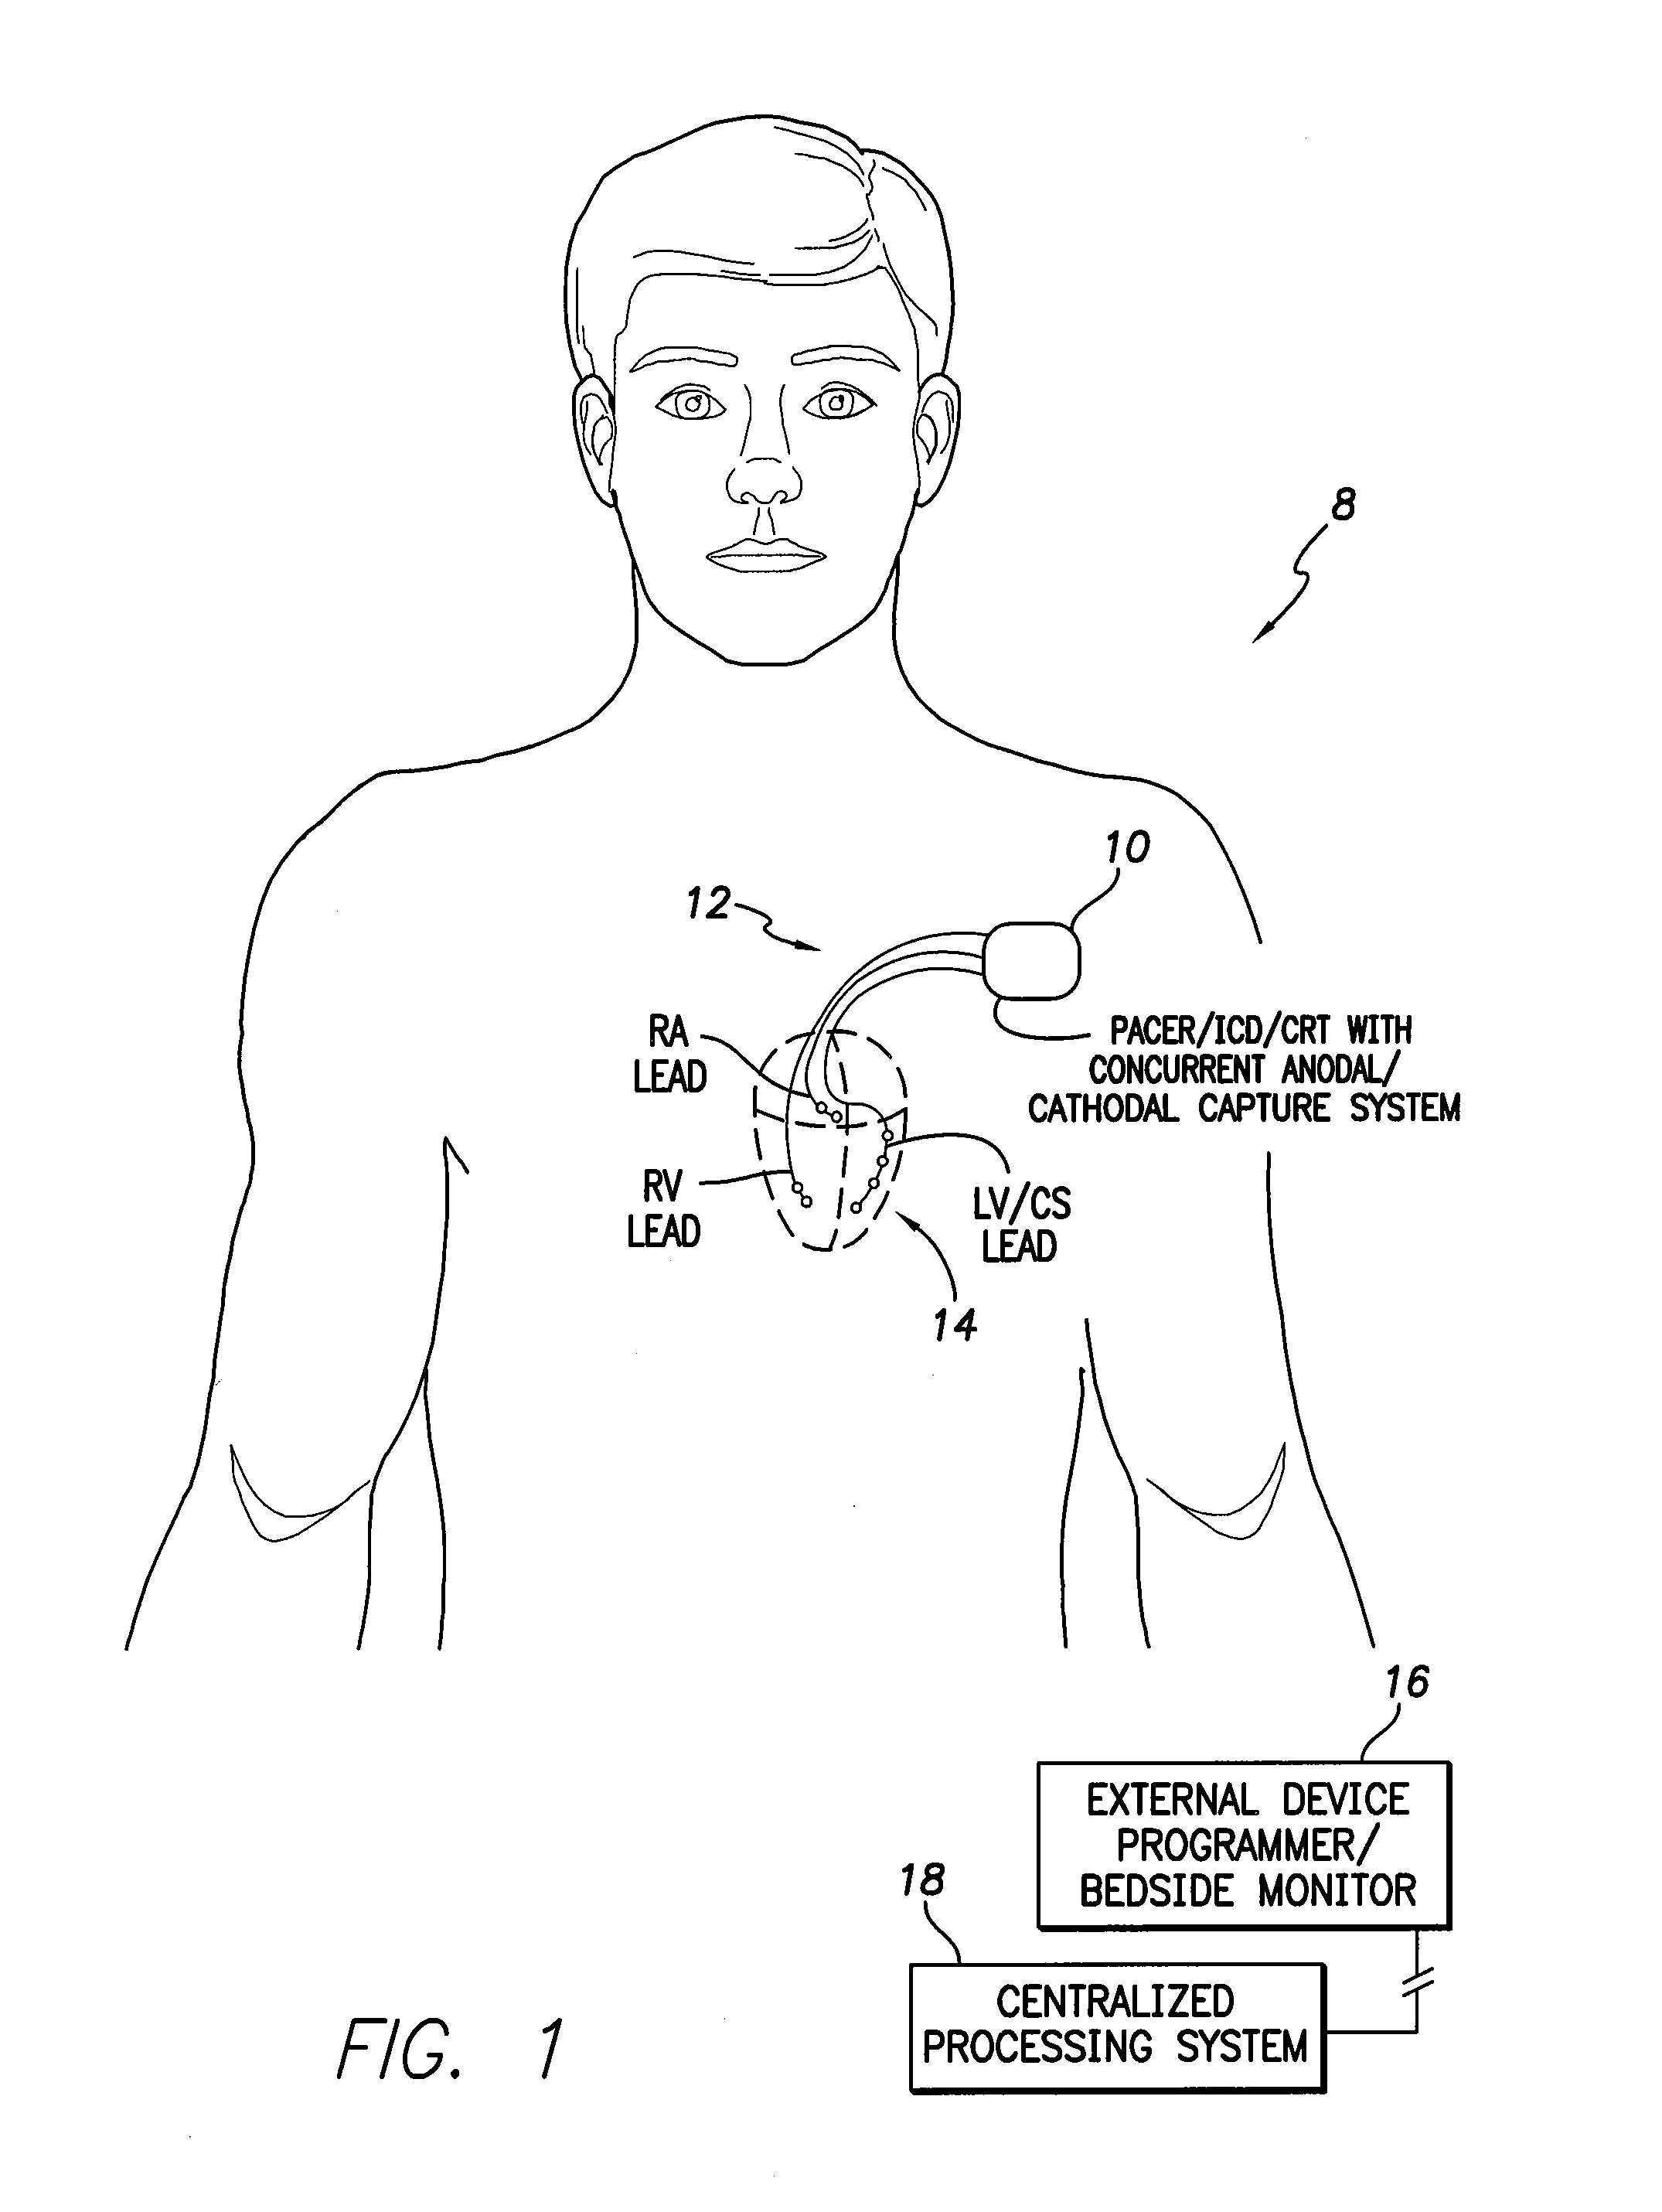 Systems and methods for assessing and exploiting concurrent cathodal and anodal capture using an implantable medical device